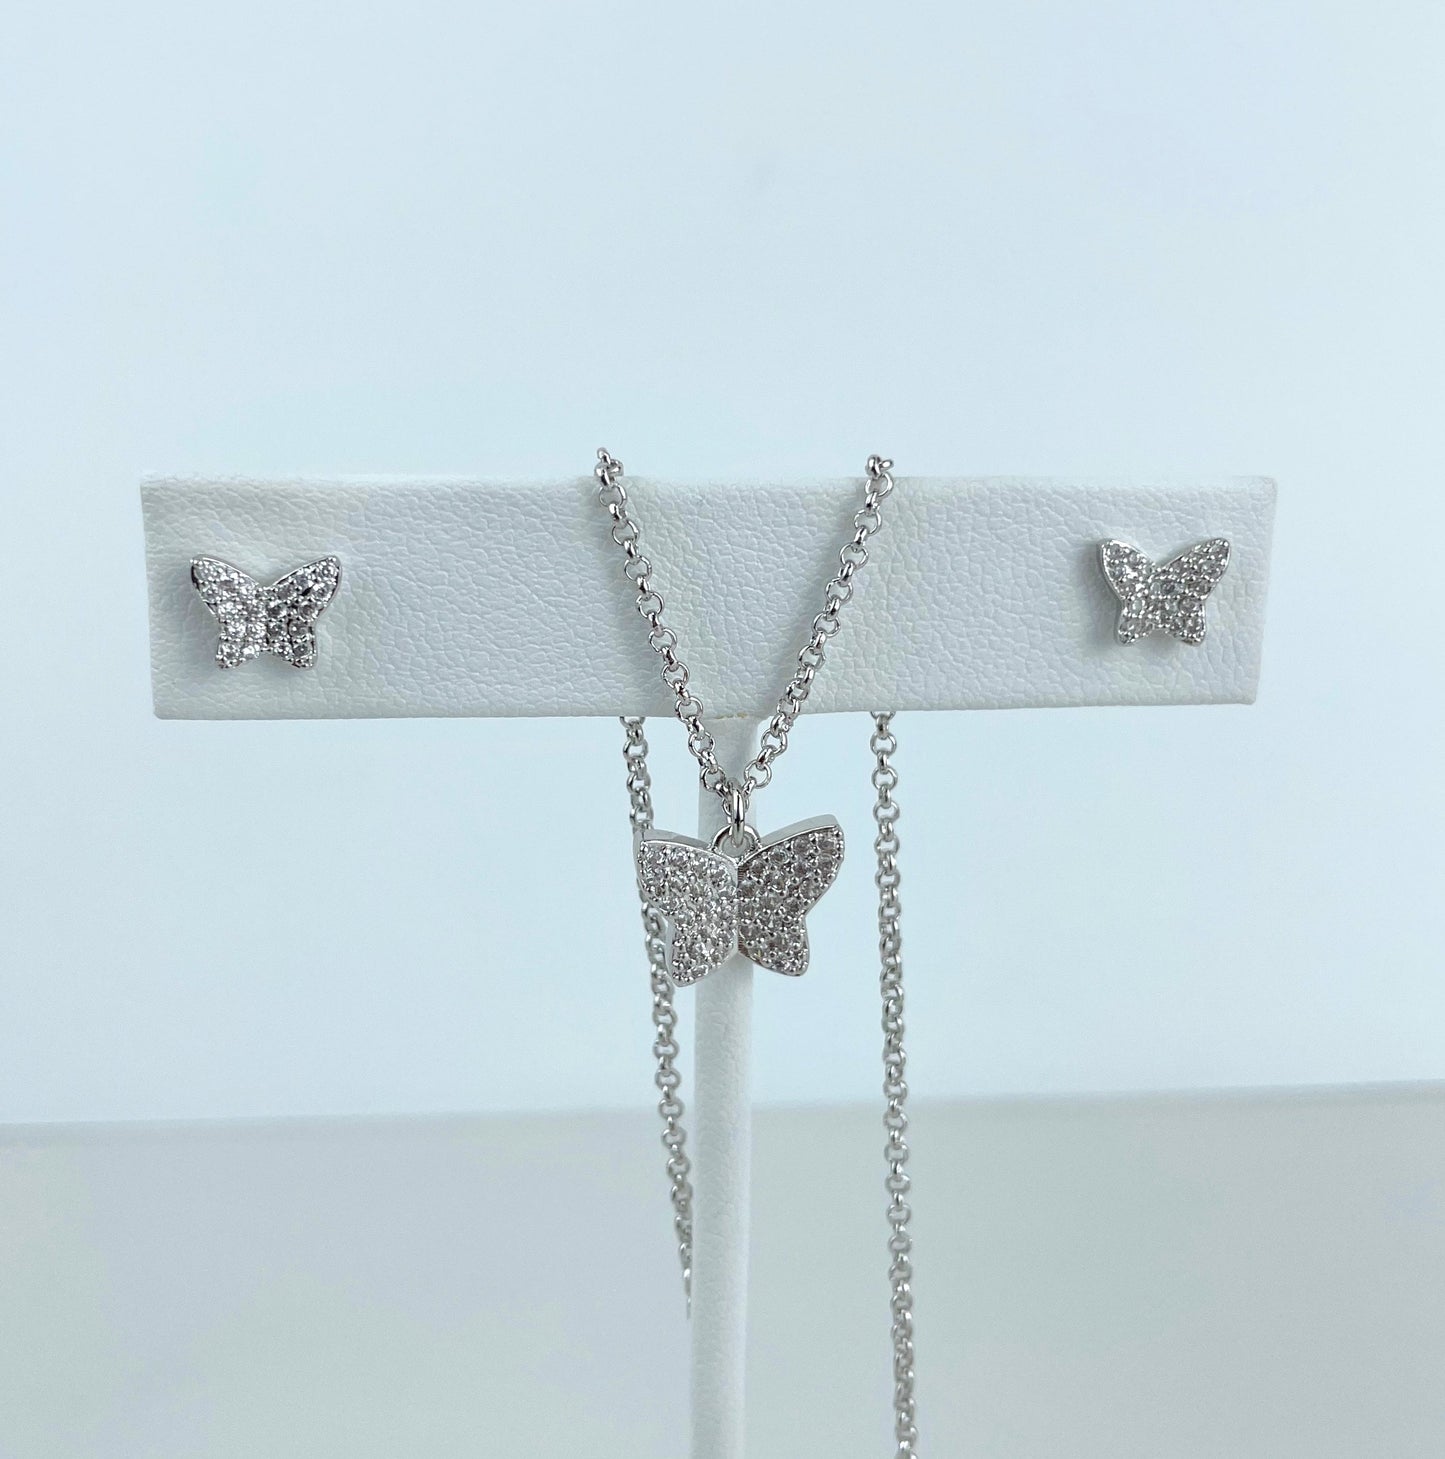 Silver Filled 1.6mm Cable Chain Necklace with Cubic Zirconia Petite Butterfly Pendant & Stud Earrings Set Wholesale Jewelry Supplies